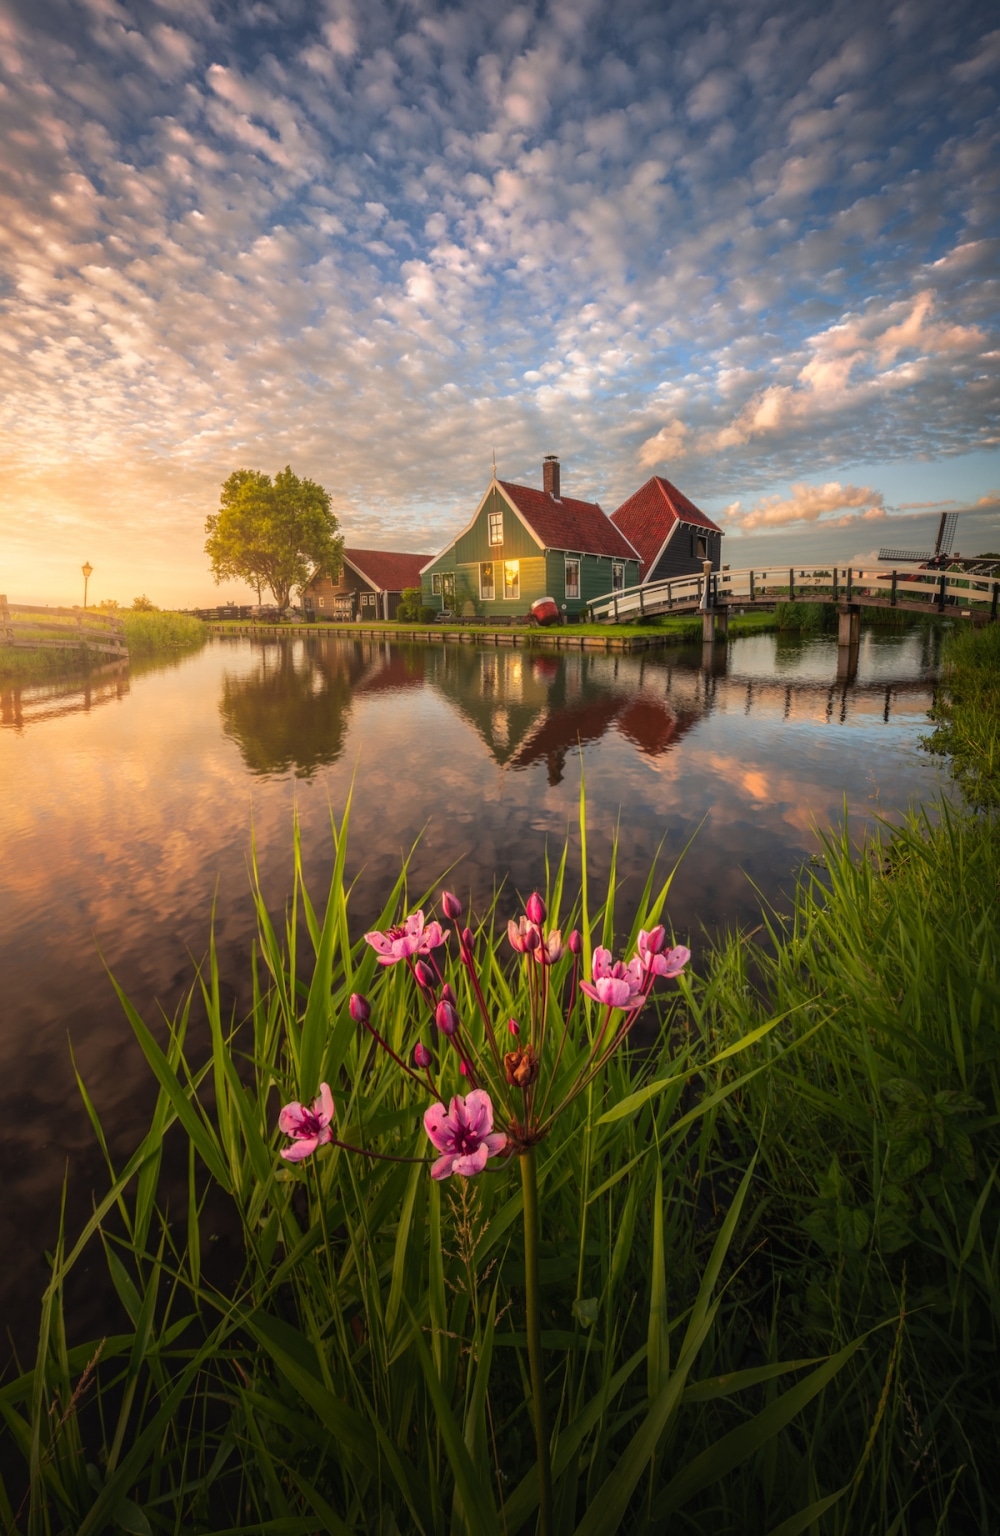 Beauty of the Netherlands in the Springtime Captured in Breathtaking